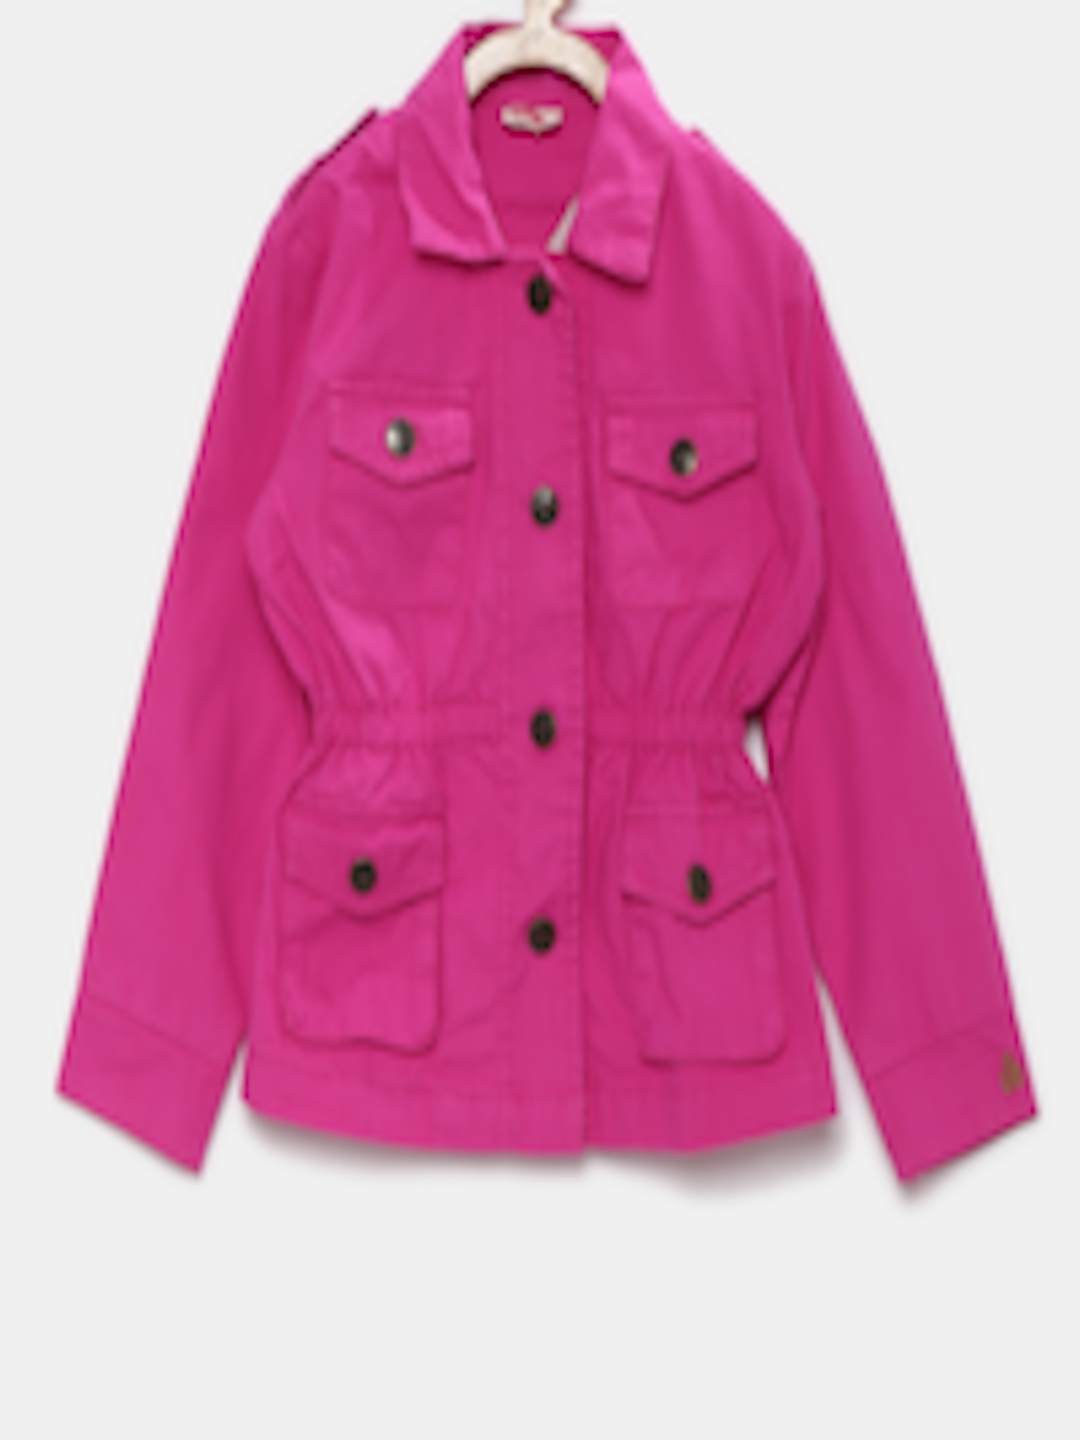 Buy UNDER FOURTEEN ONLY - Jackets for Girls 1497412 | Myntra